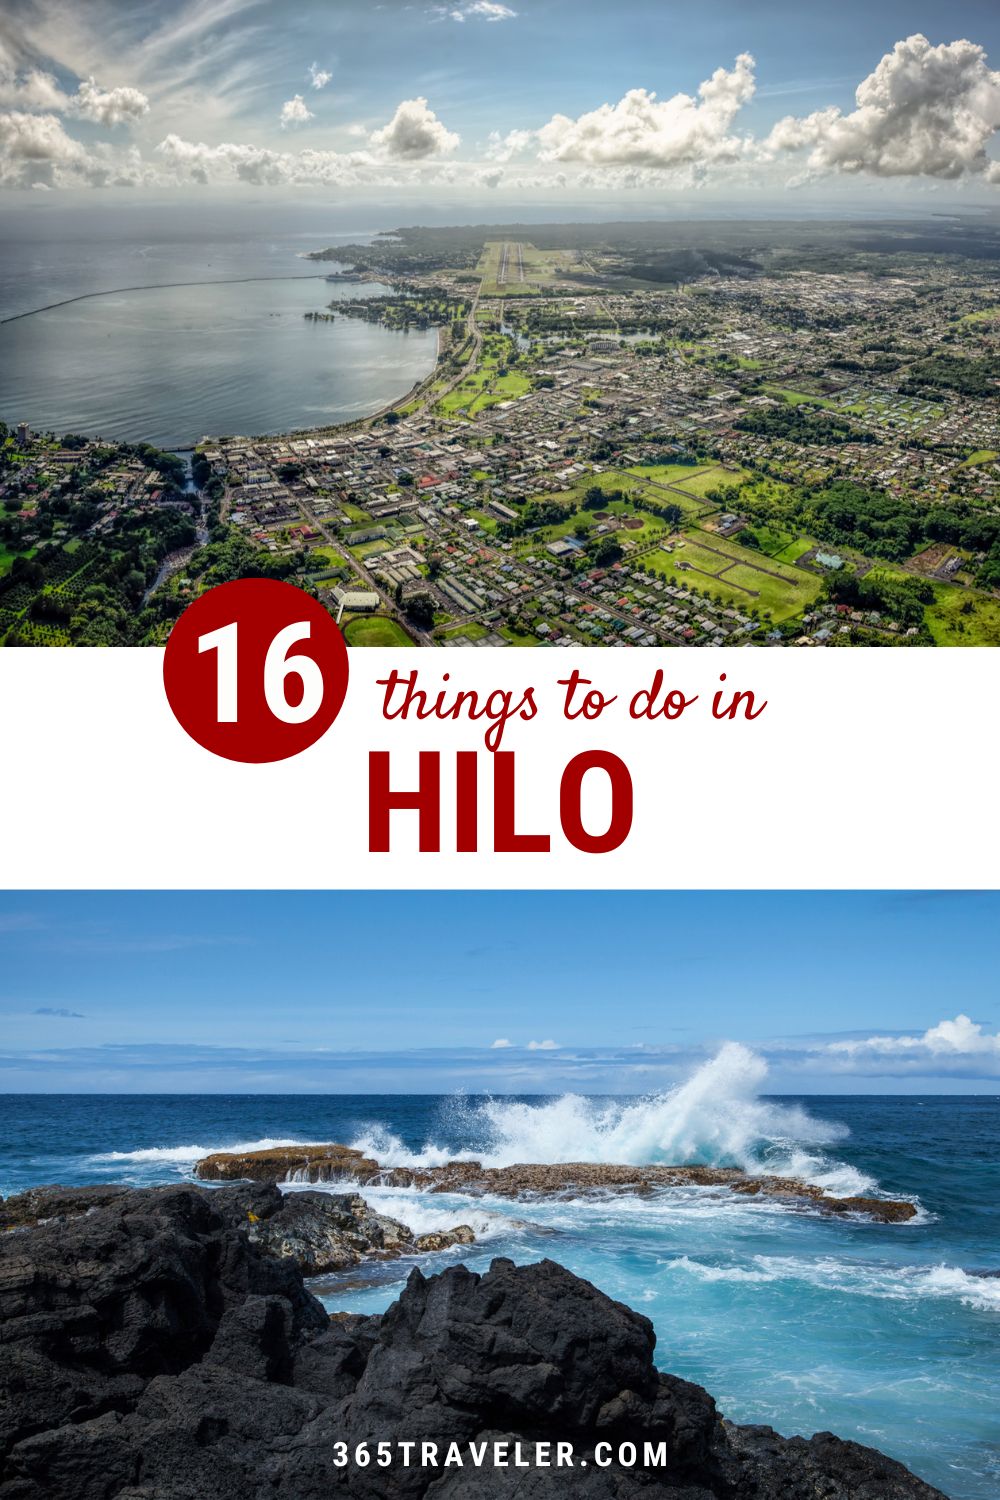 16 SPECTACULAR THINGS TO DO IN HILO, HAWAII